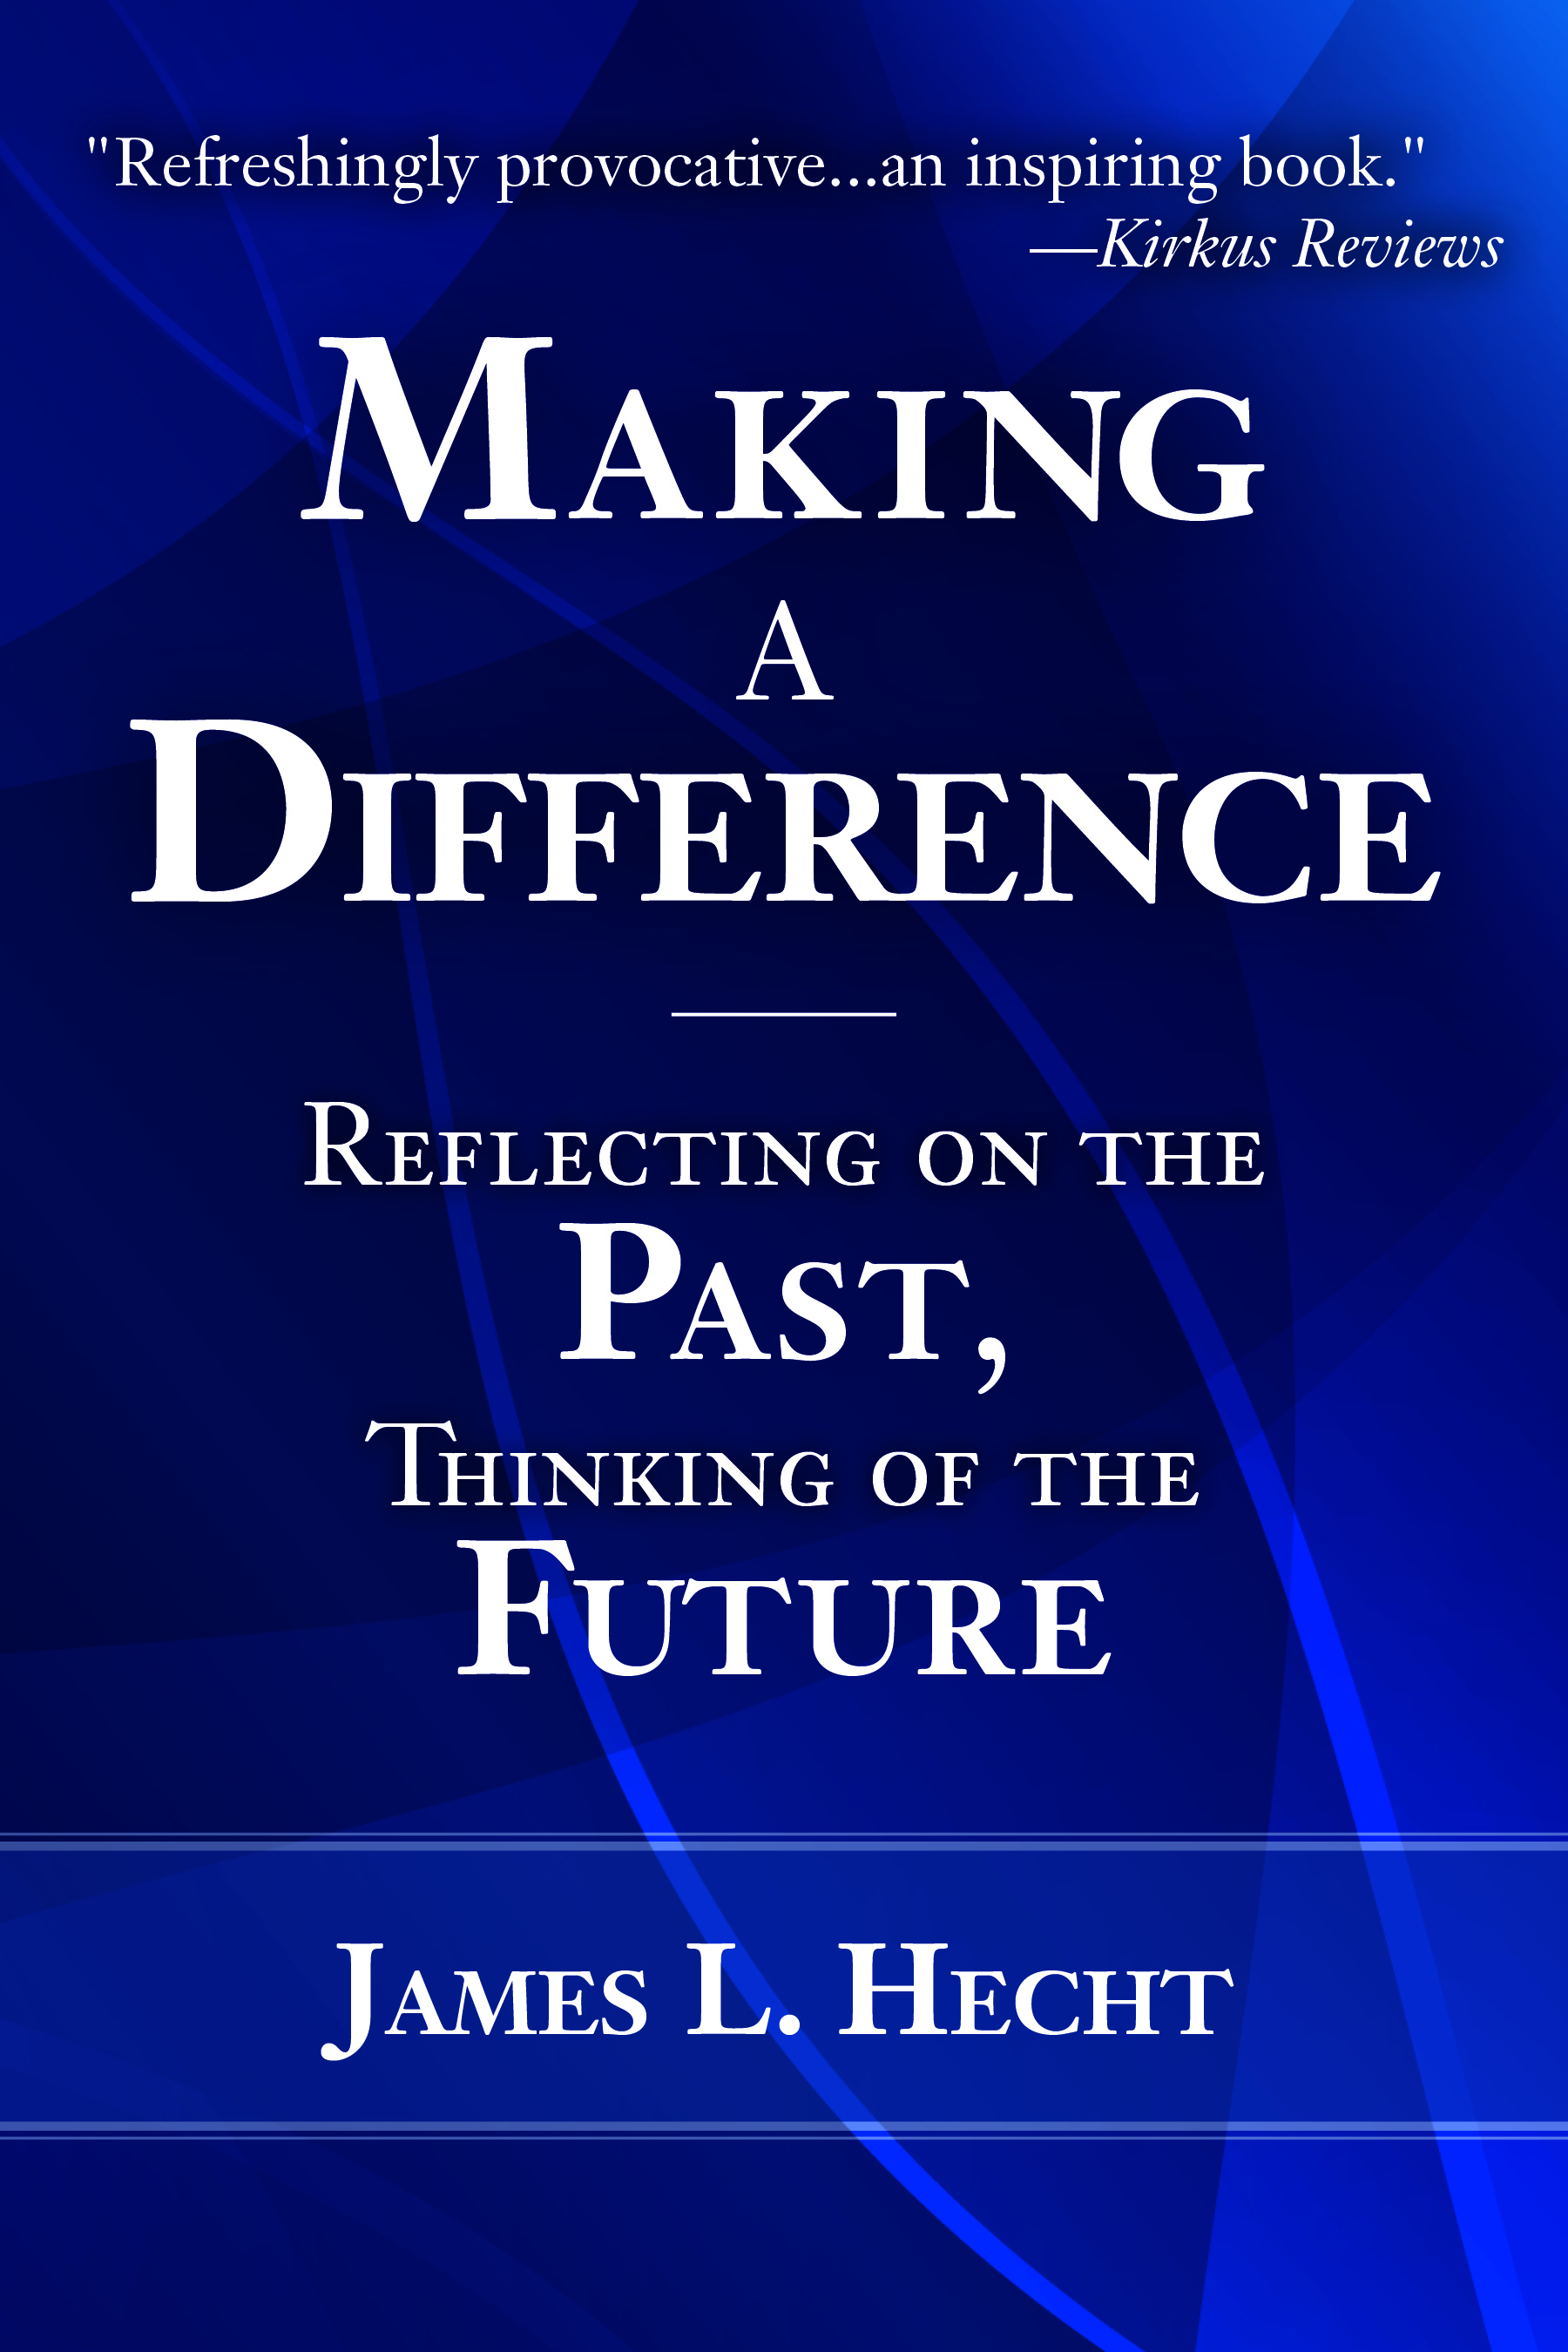 Making A Difference: Reflecting on the Past, Thinking of the Future